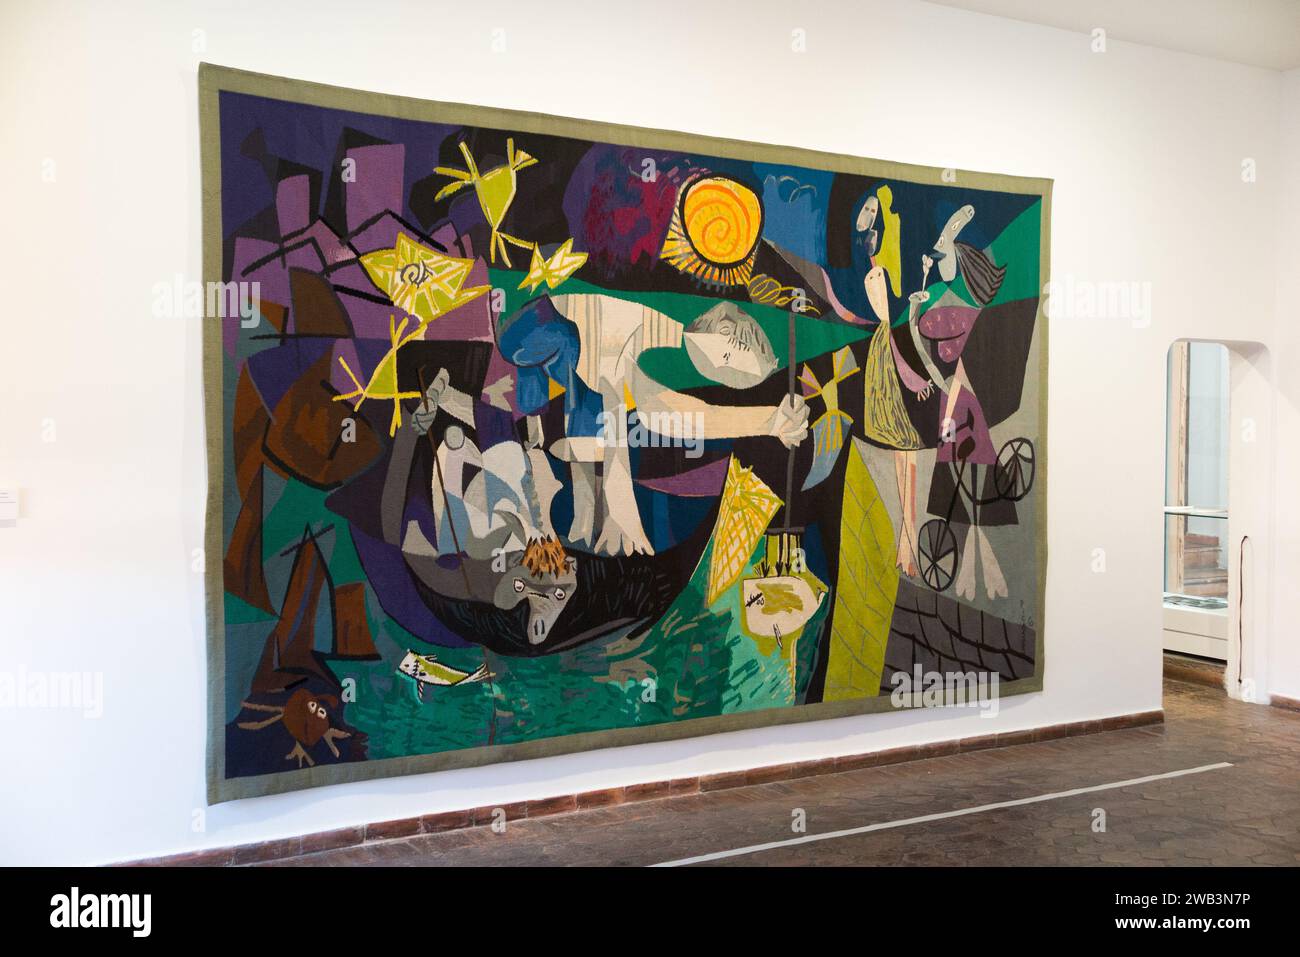 https://c8.alamy.com/comp/2WB3N7P/tapestry-picture-after-pche-de-nuit-antibes-oil-painting-picasso-art-on-display-in-muse-picasso-formerly-chteau-grimaldi-antibes-france-135-2WB3N7P.jpg